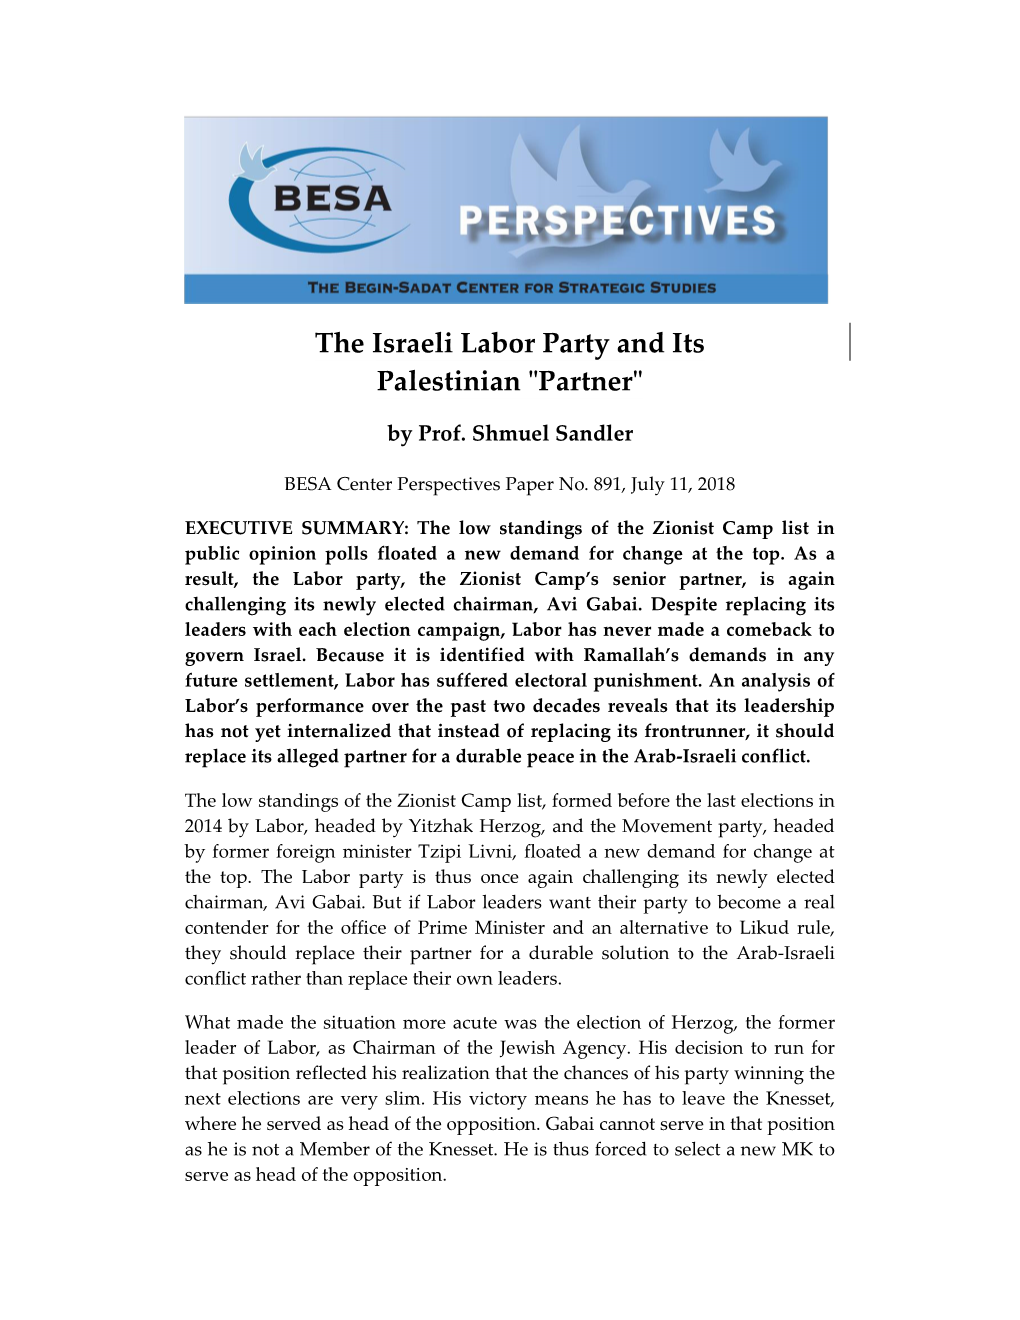 The Israeli Labor Party and Its Palestinian "Partner"